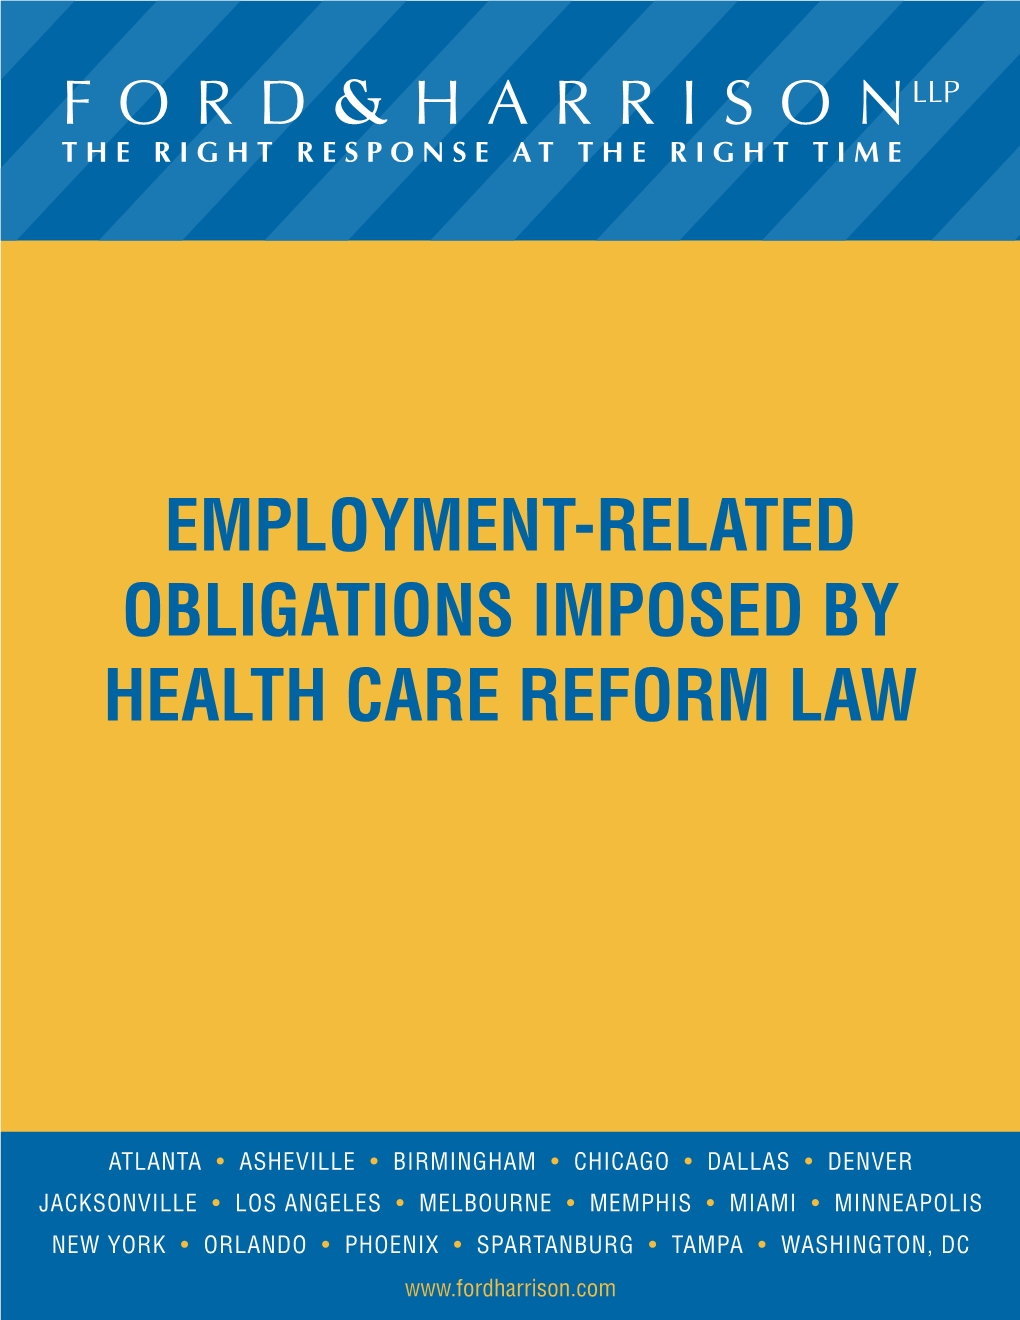 Employment-Related Obligations Imposed by Health Care Reform Law